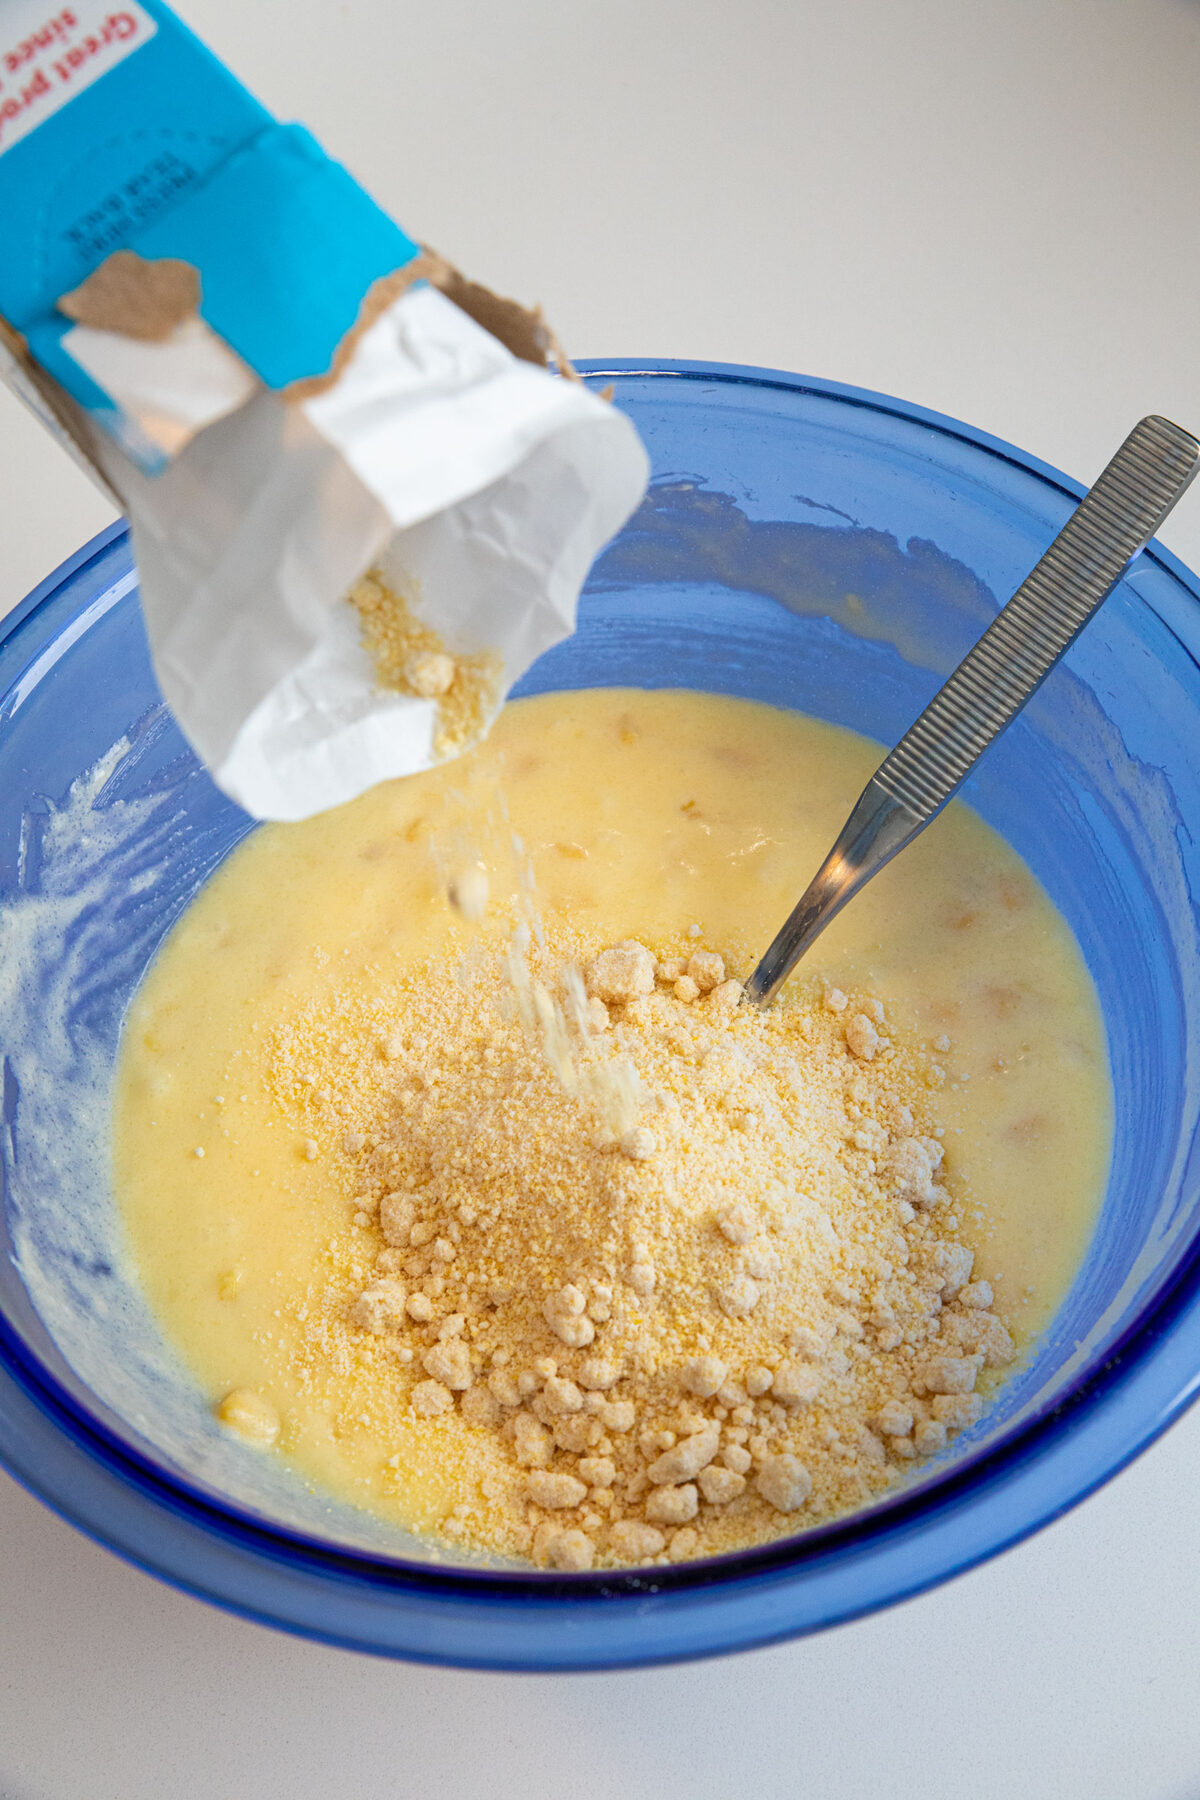 pouring Jiffy mix into batter 